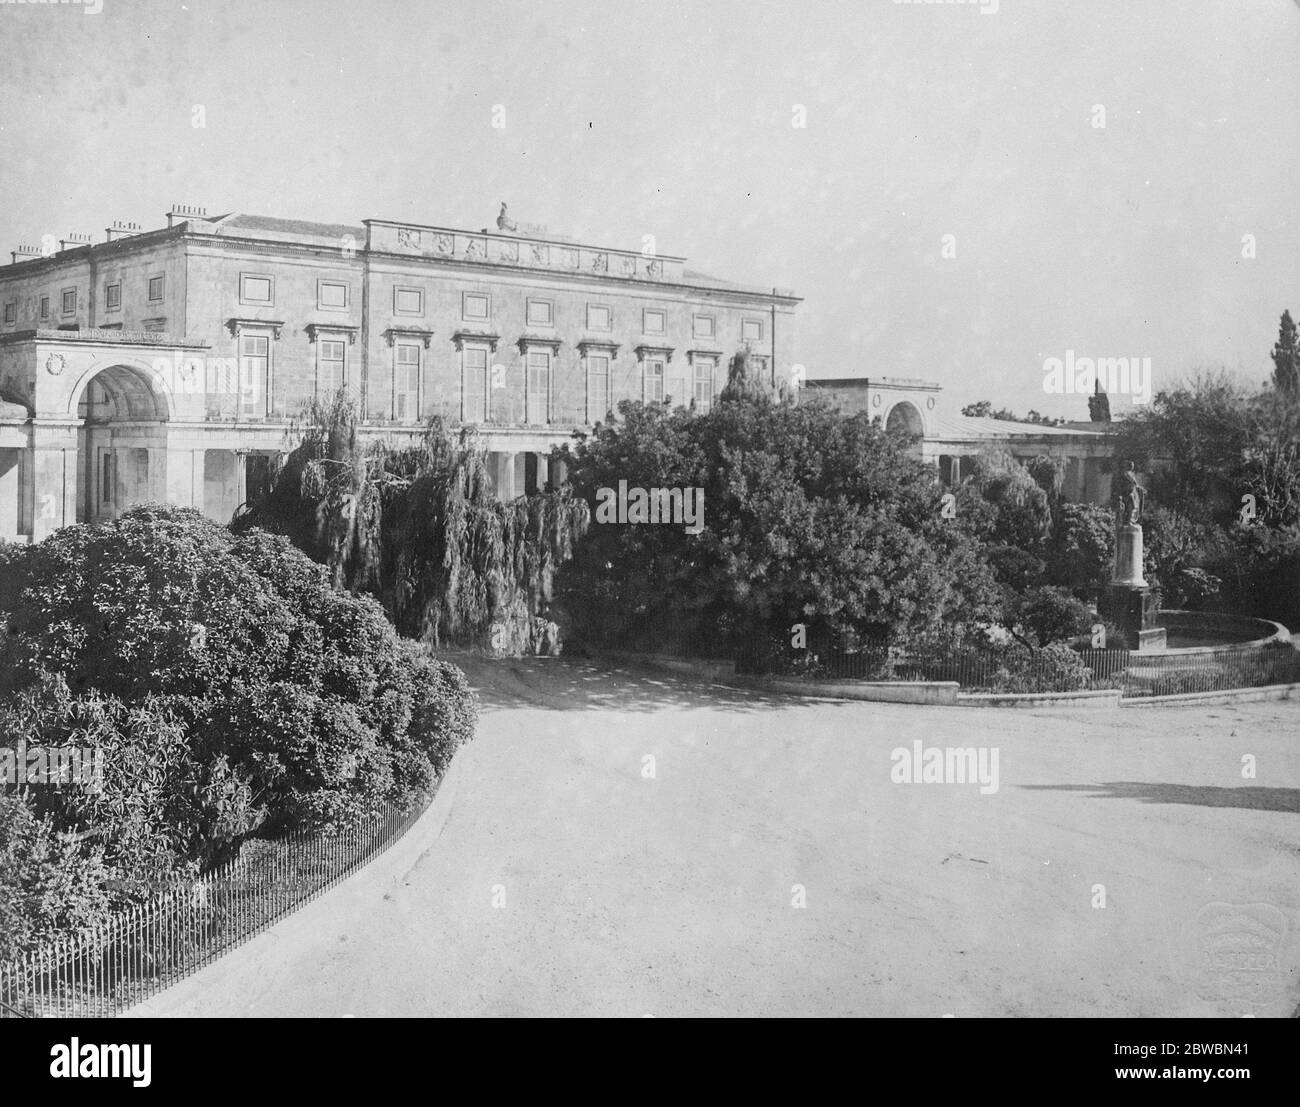 Royal Palace confiscated . The Royal Palace at Corfu , one of the residences of Prince Andrew , which he loses as a result of the recent court martial . The Greek Royal Palace at Corfu was built for the British Lord High Commissioner , and the throne room is still adorned with portraits of British sovereigns .  4 December 1922 Stock Photo